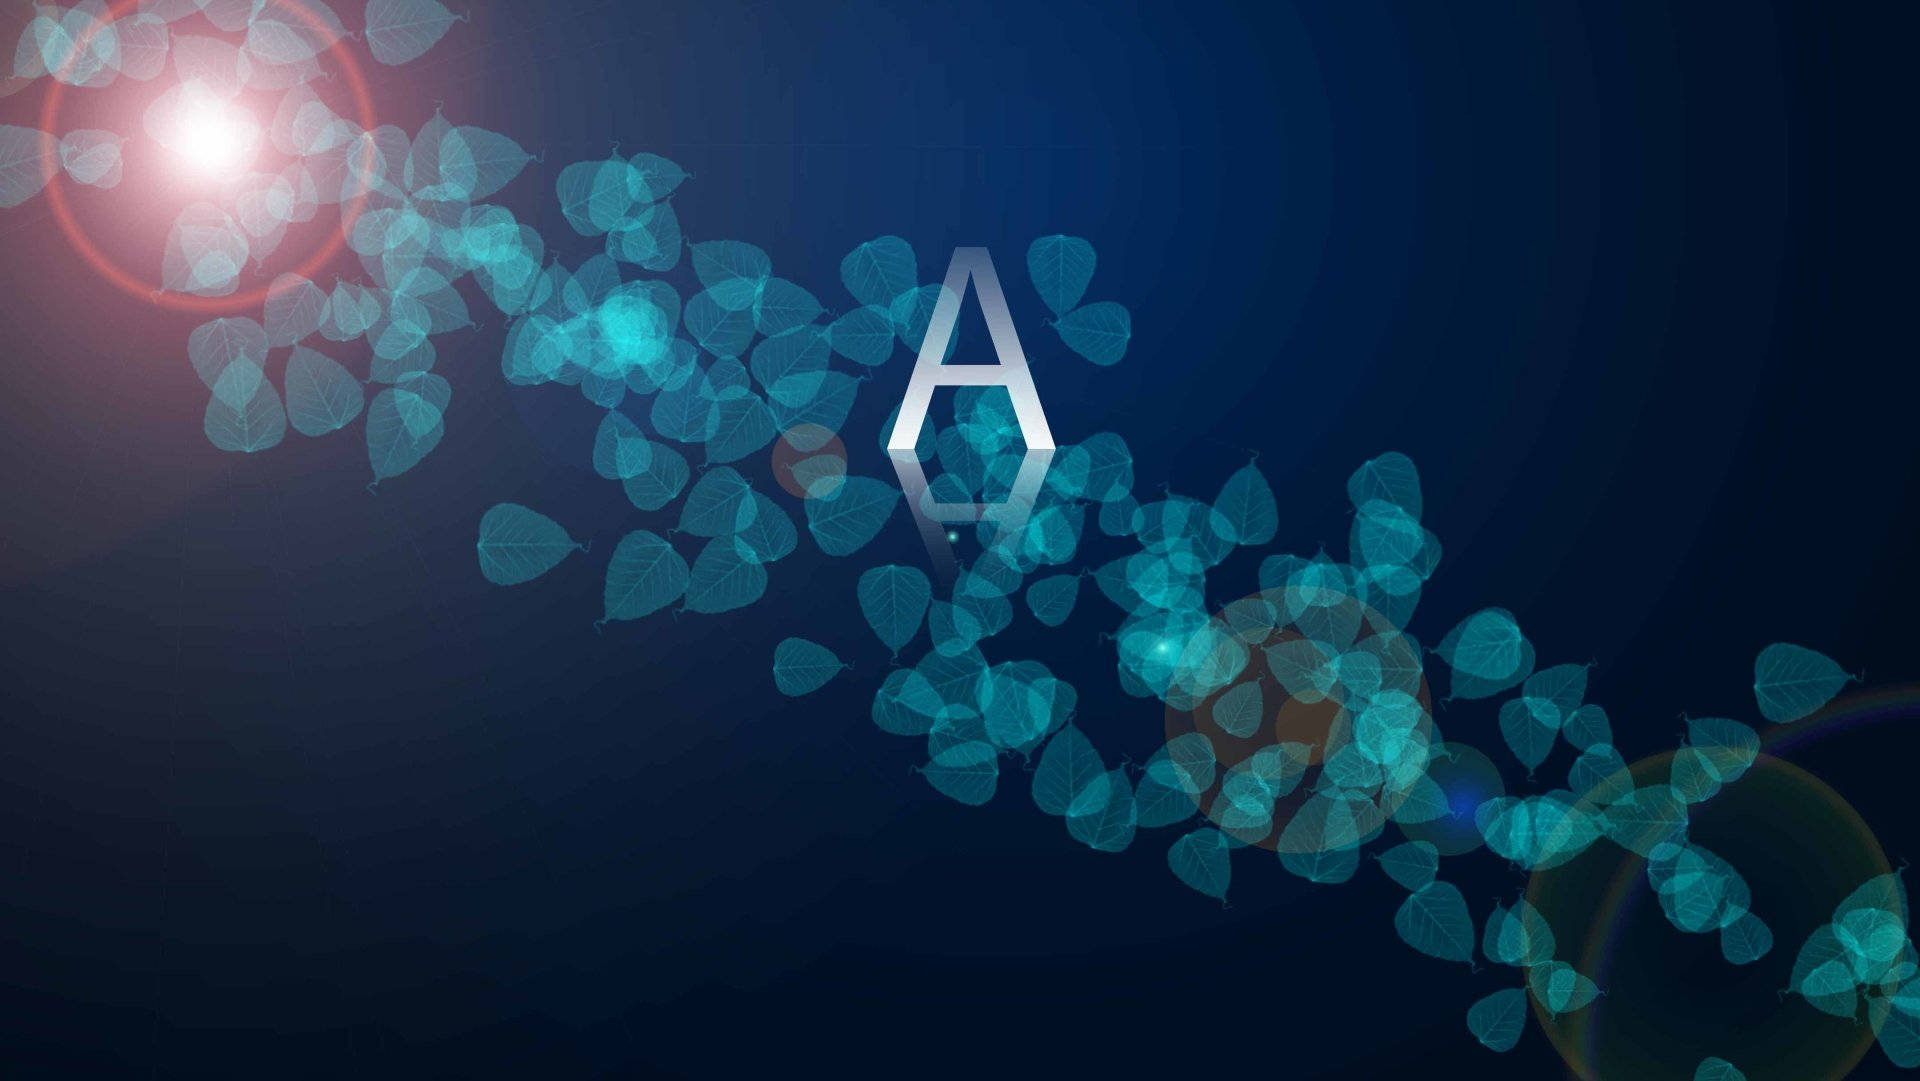 Artistic Representation Of Letter A Surrounded By Blue Leaves